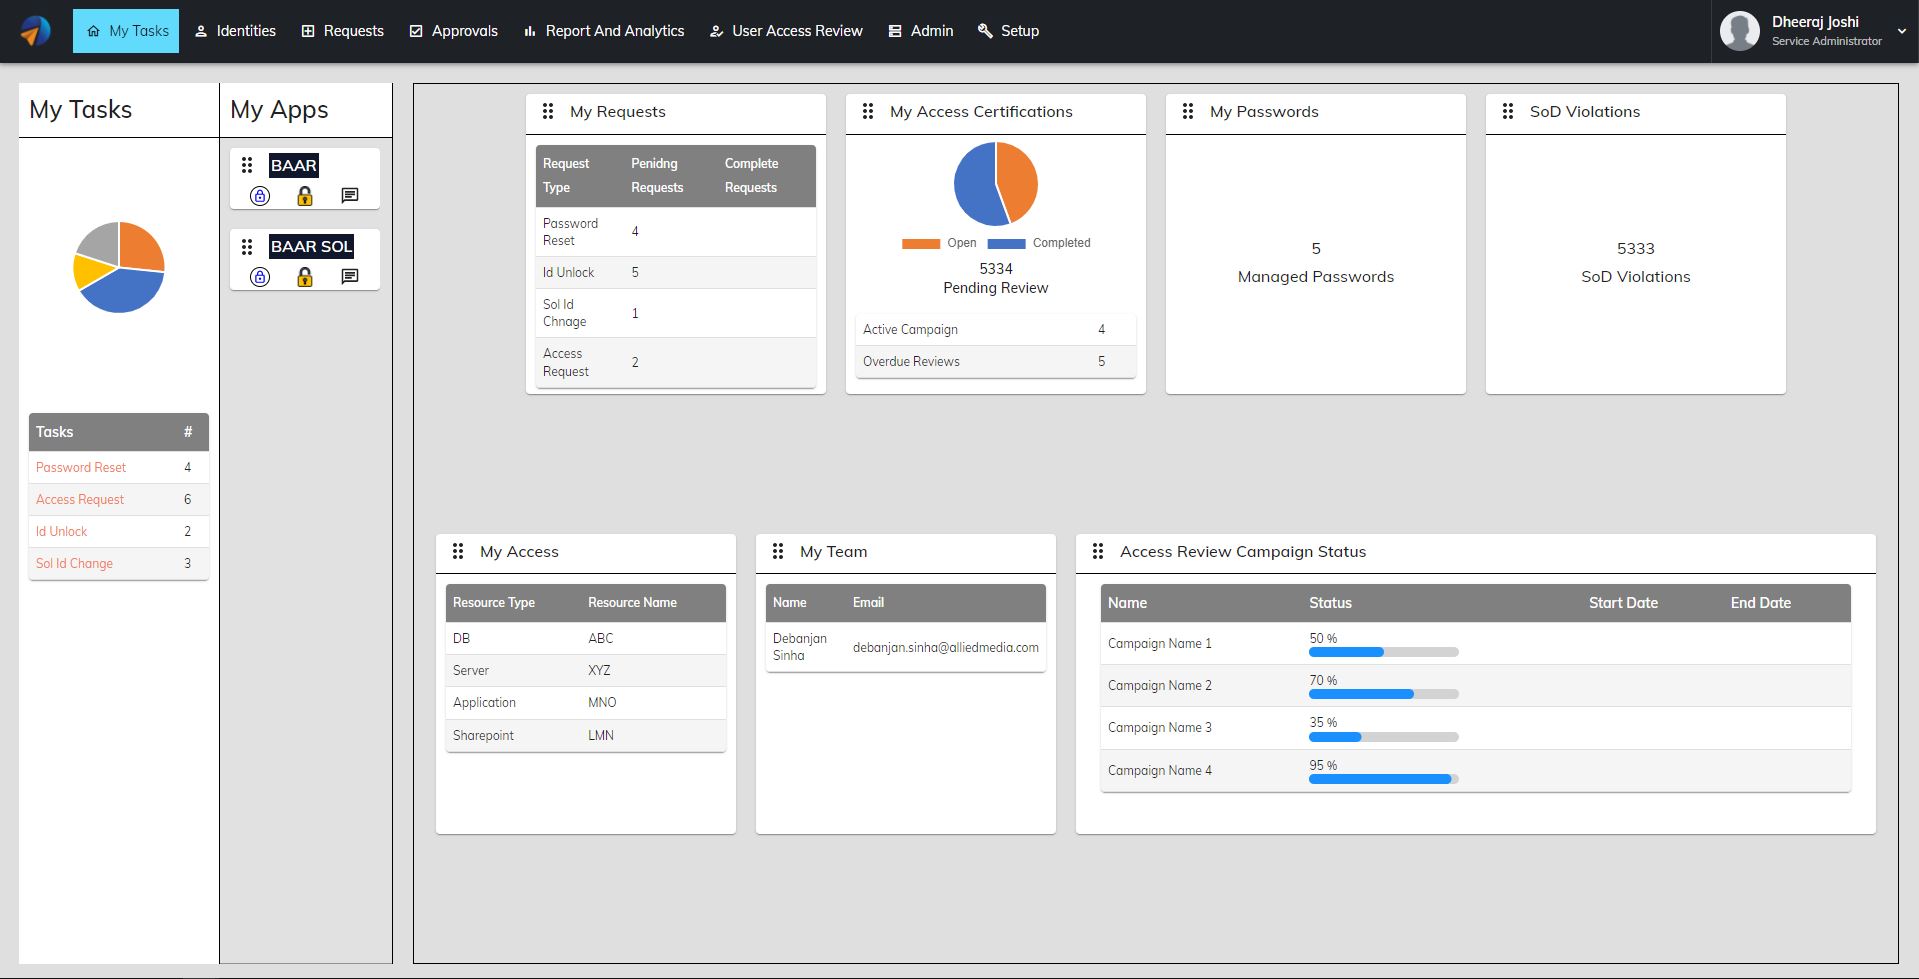 Dashboards for every user provide all details that matter to the respective user. These are actionable dashboards .